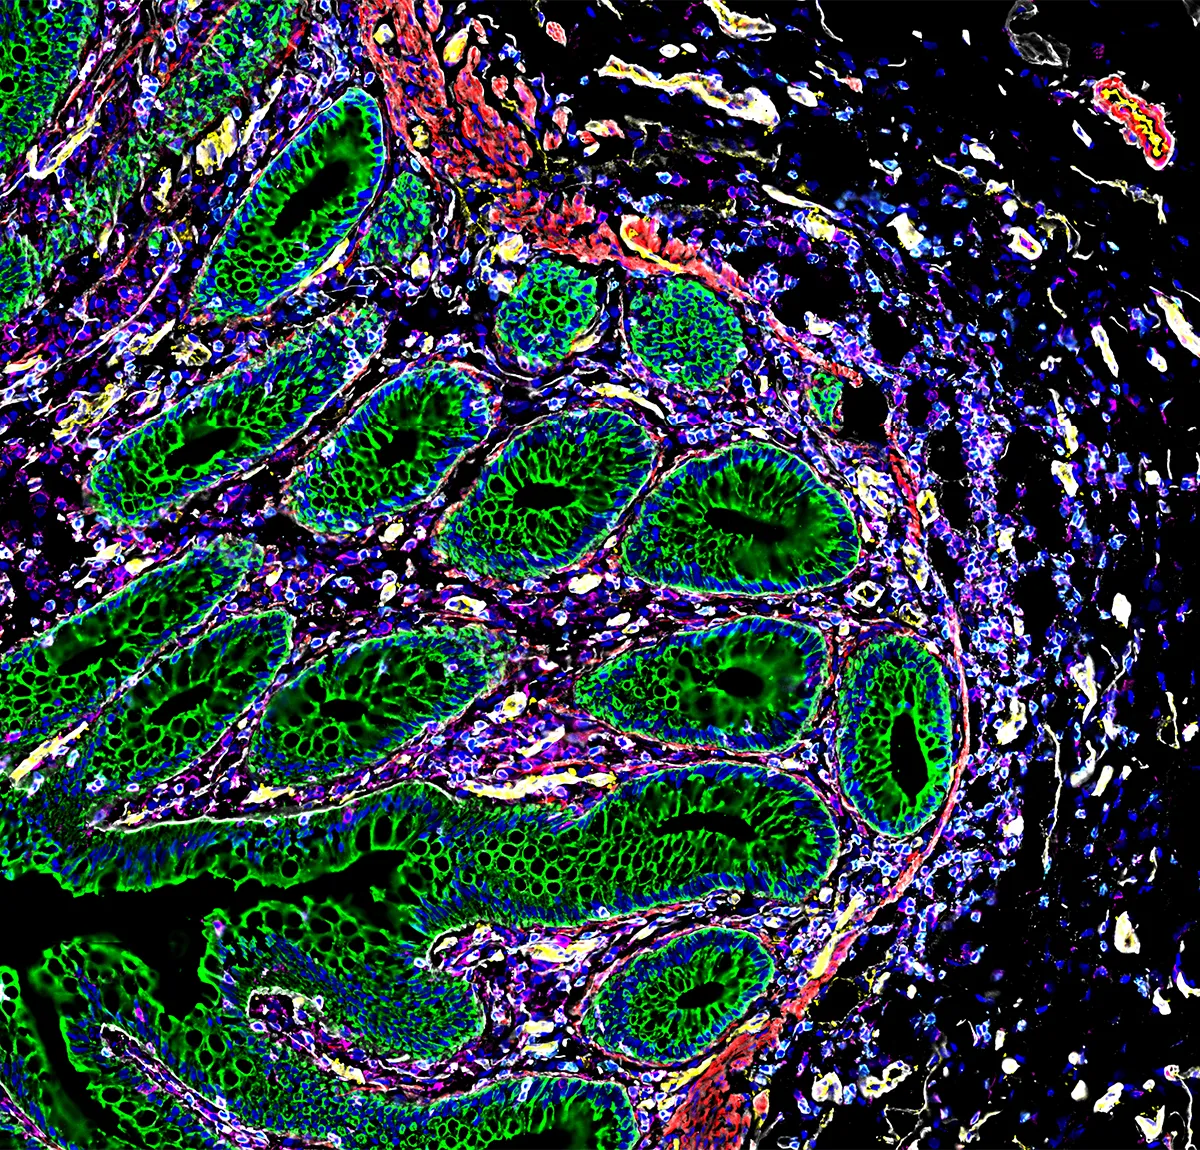 green areas of stomach microscope image